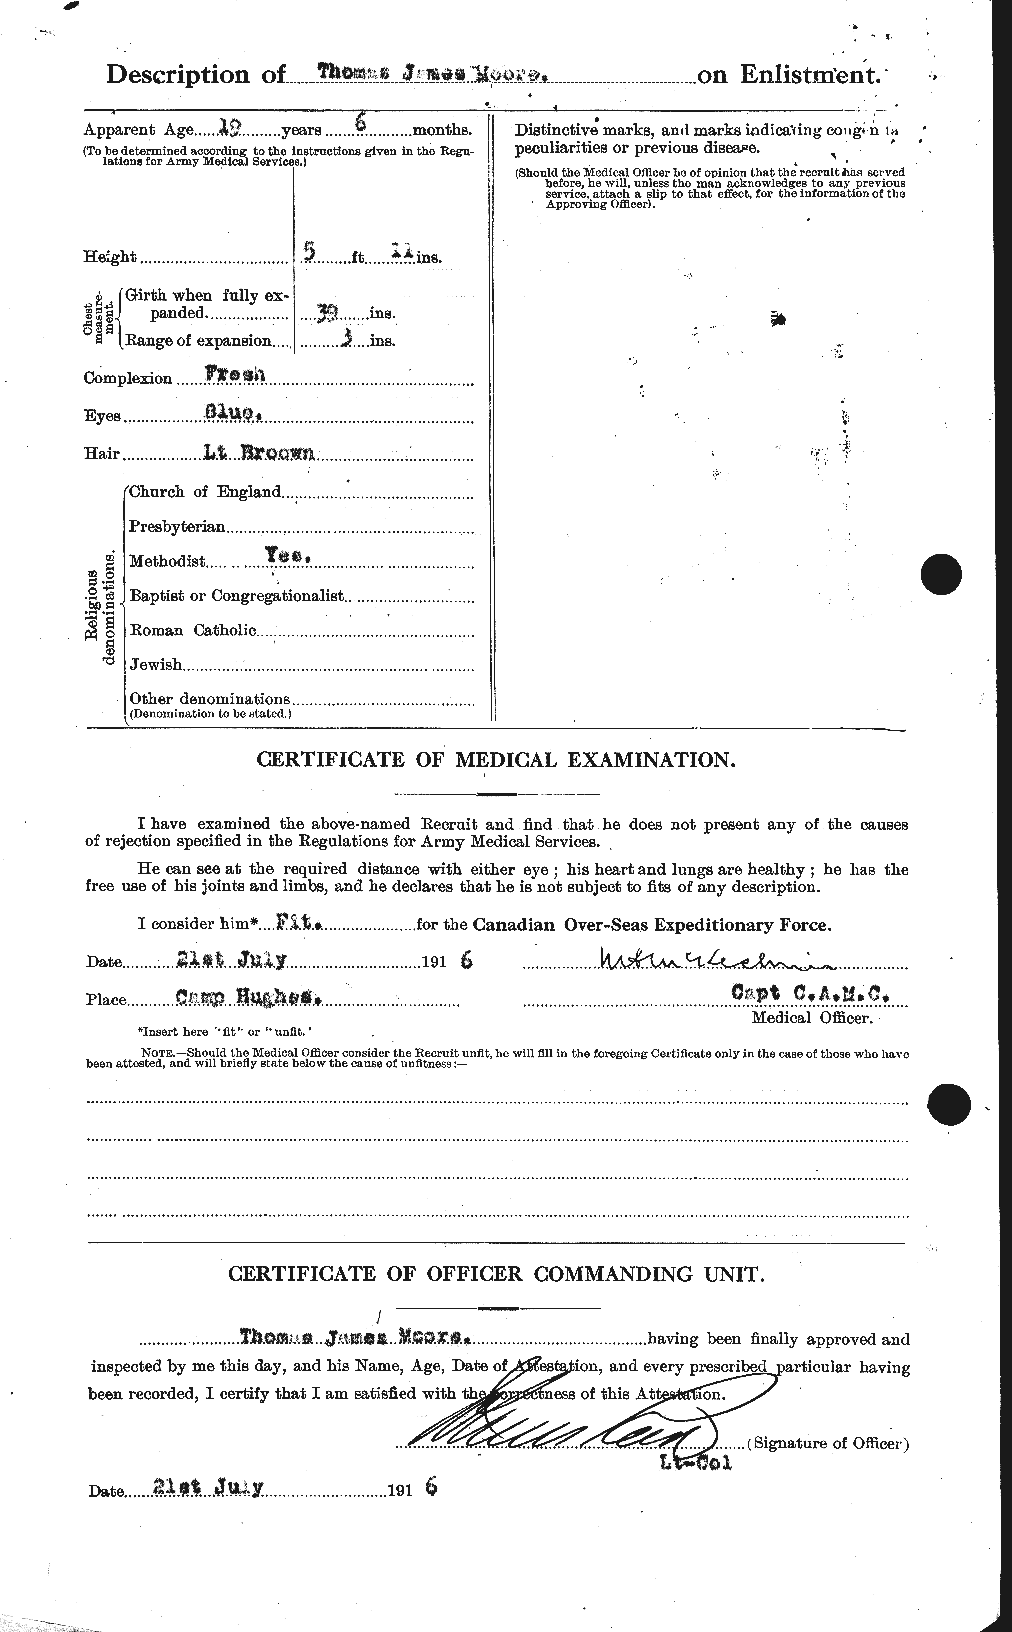 Personnel Records of the First World War - CEF 505657b